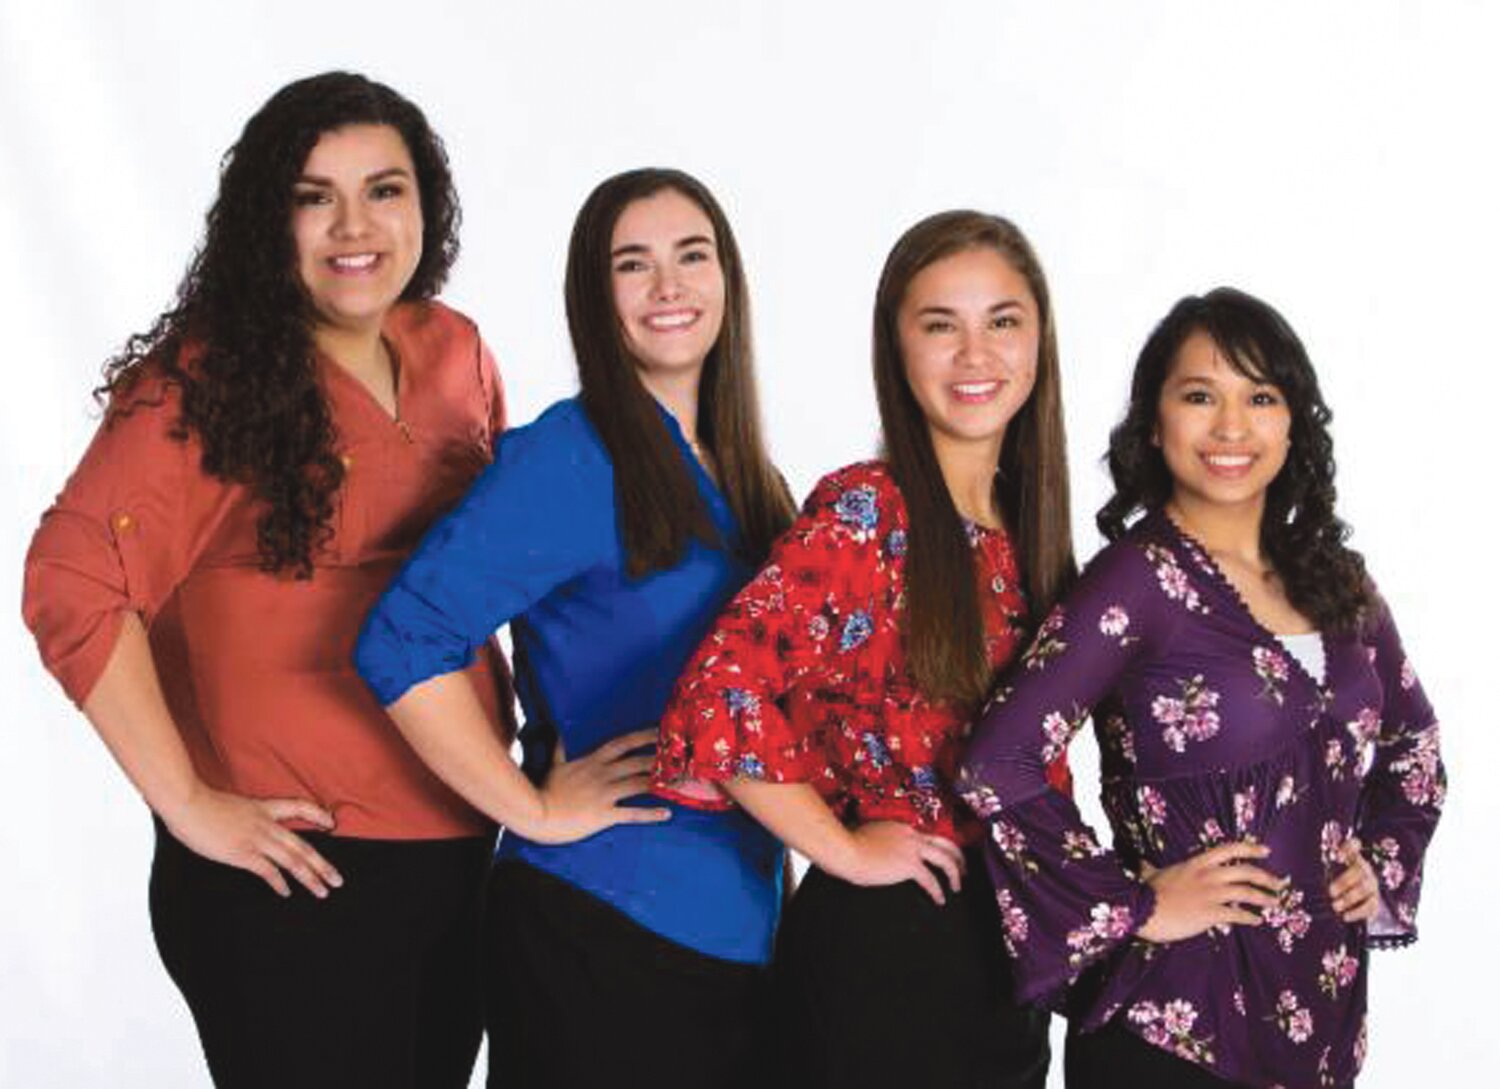 Manson Apple Blossom Selection night is Saturday, January 27, 6:30 p.m., in the Manson High School Gym. A queen and three princesses will be selected from the above candidates. Left to right are: Celina Mendoza, Alyssa La Mar, Addi Torgeson,  and Diocelina Cervantes. Master of Ceremonies will be Jeff Conwell. Cost is $8 for adults and high school students, and $5 elementary students. Theme for this year’s 98th Manson Apple Festival on May 11 and 12, is Apple Blossom Fever.